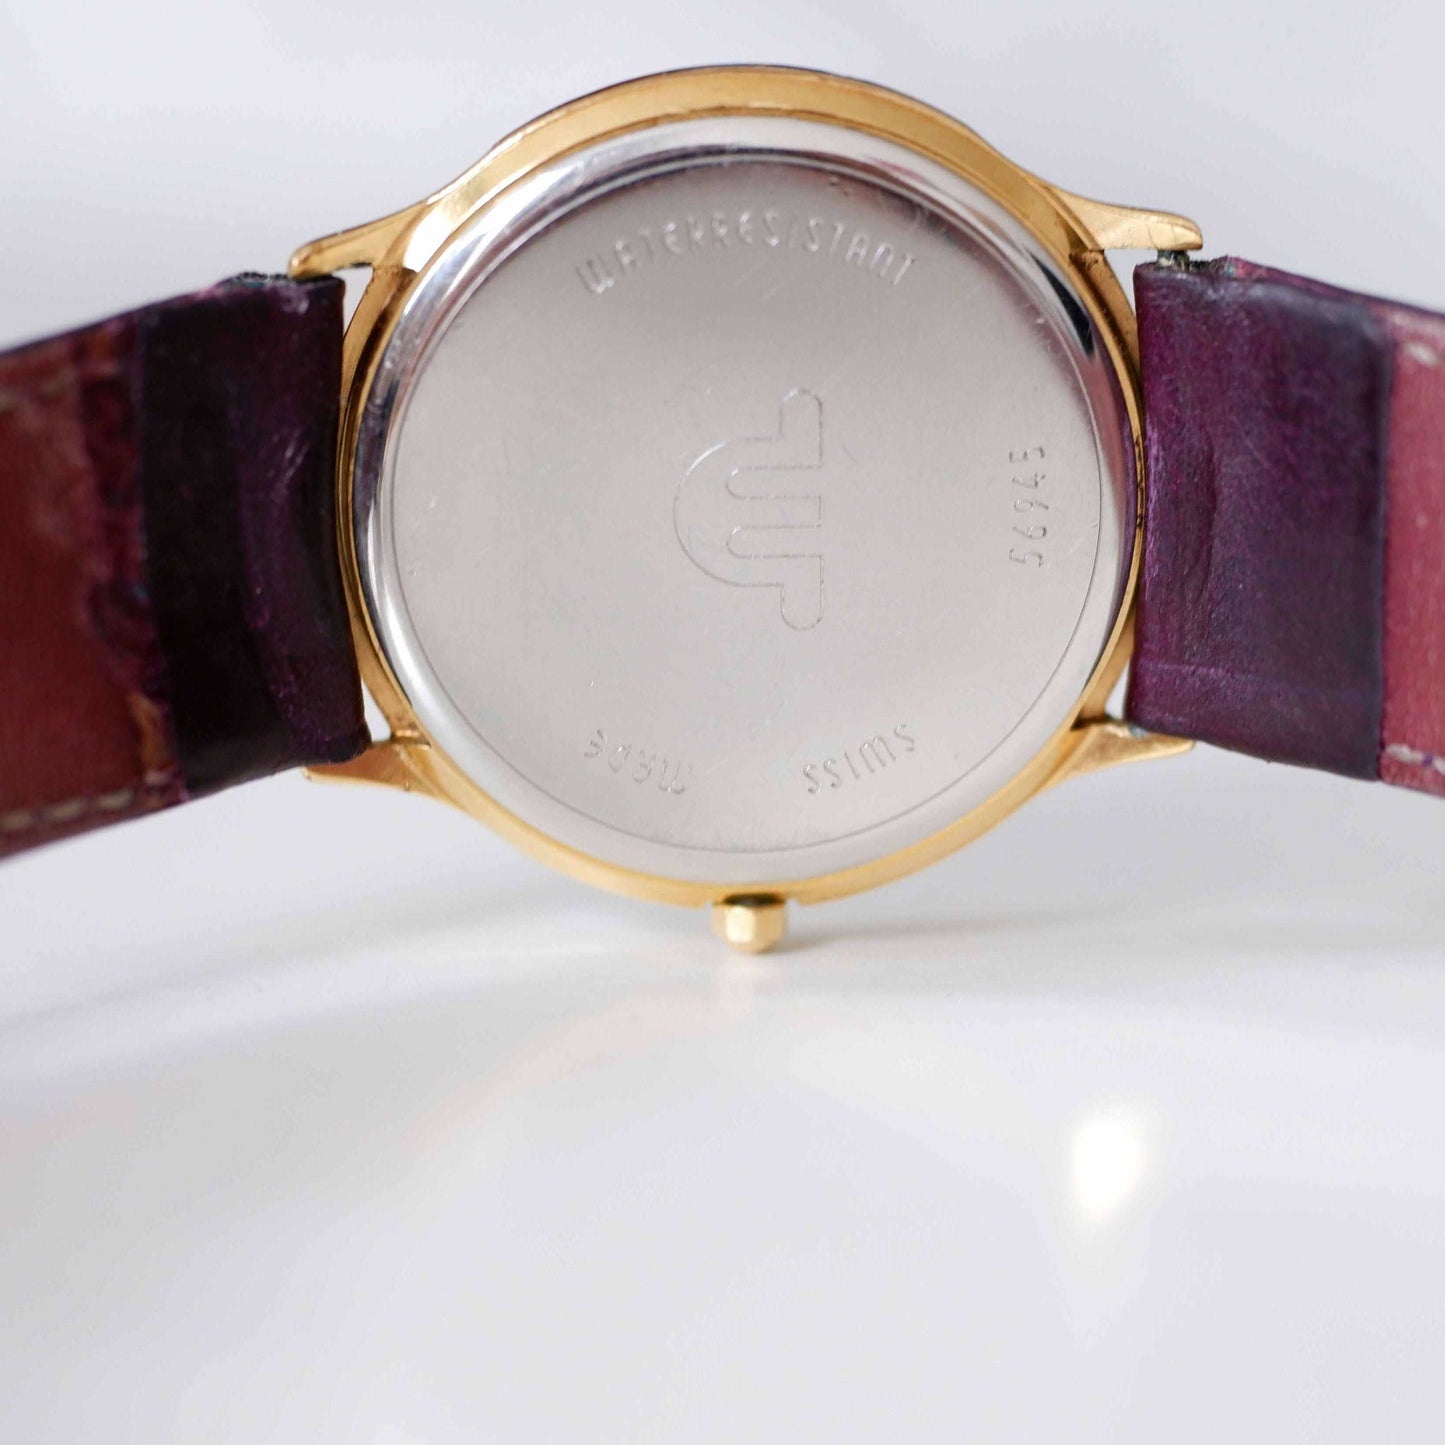 Maurice Lacroix Vintage Ladies Watch: 90s Golden with Classic Roman Numerals, Back Side